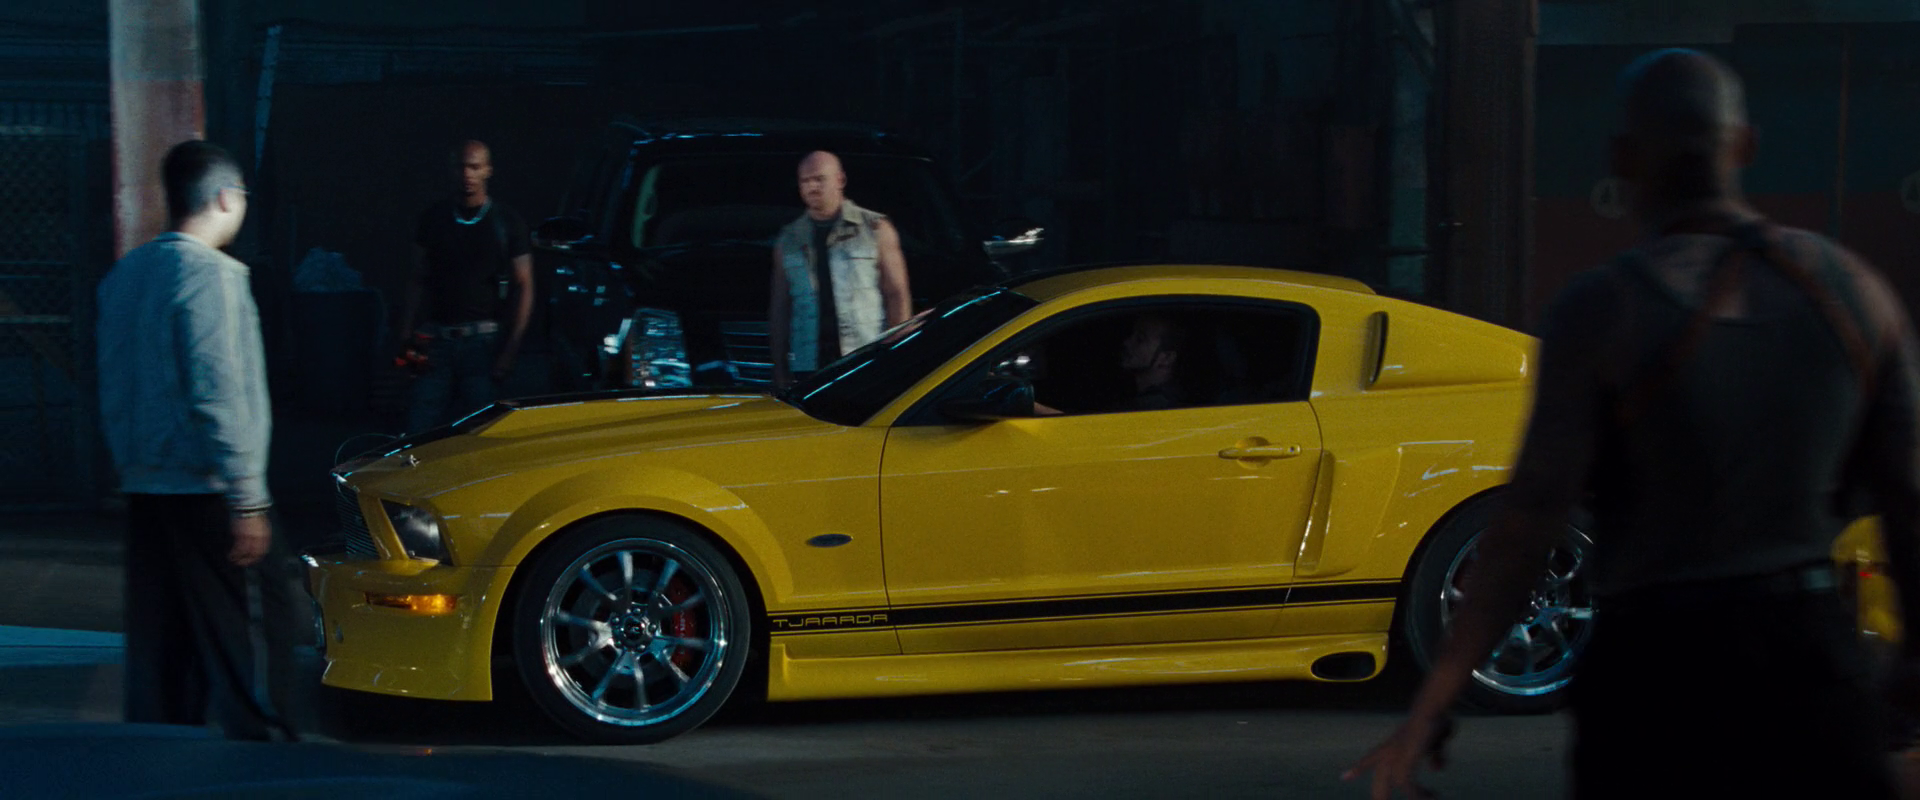 2008 Ford Mustang Gt Tjaarda 550r The Fast And The Furious